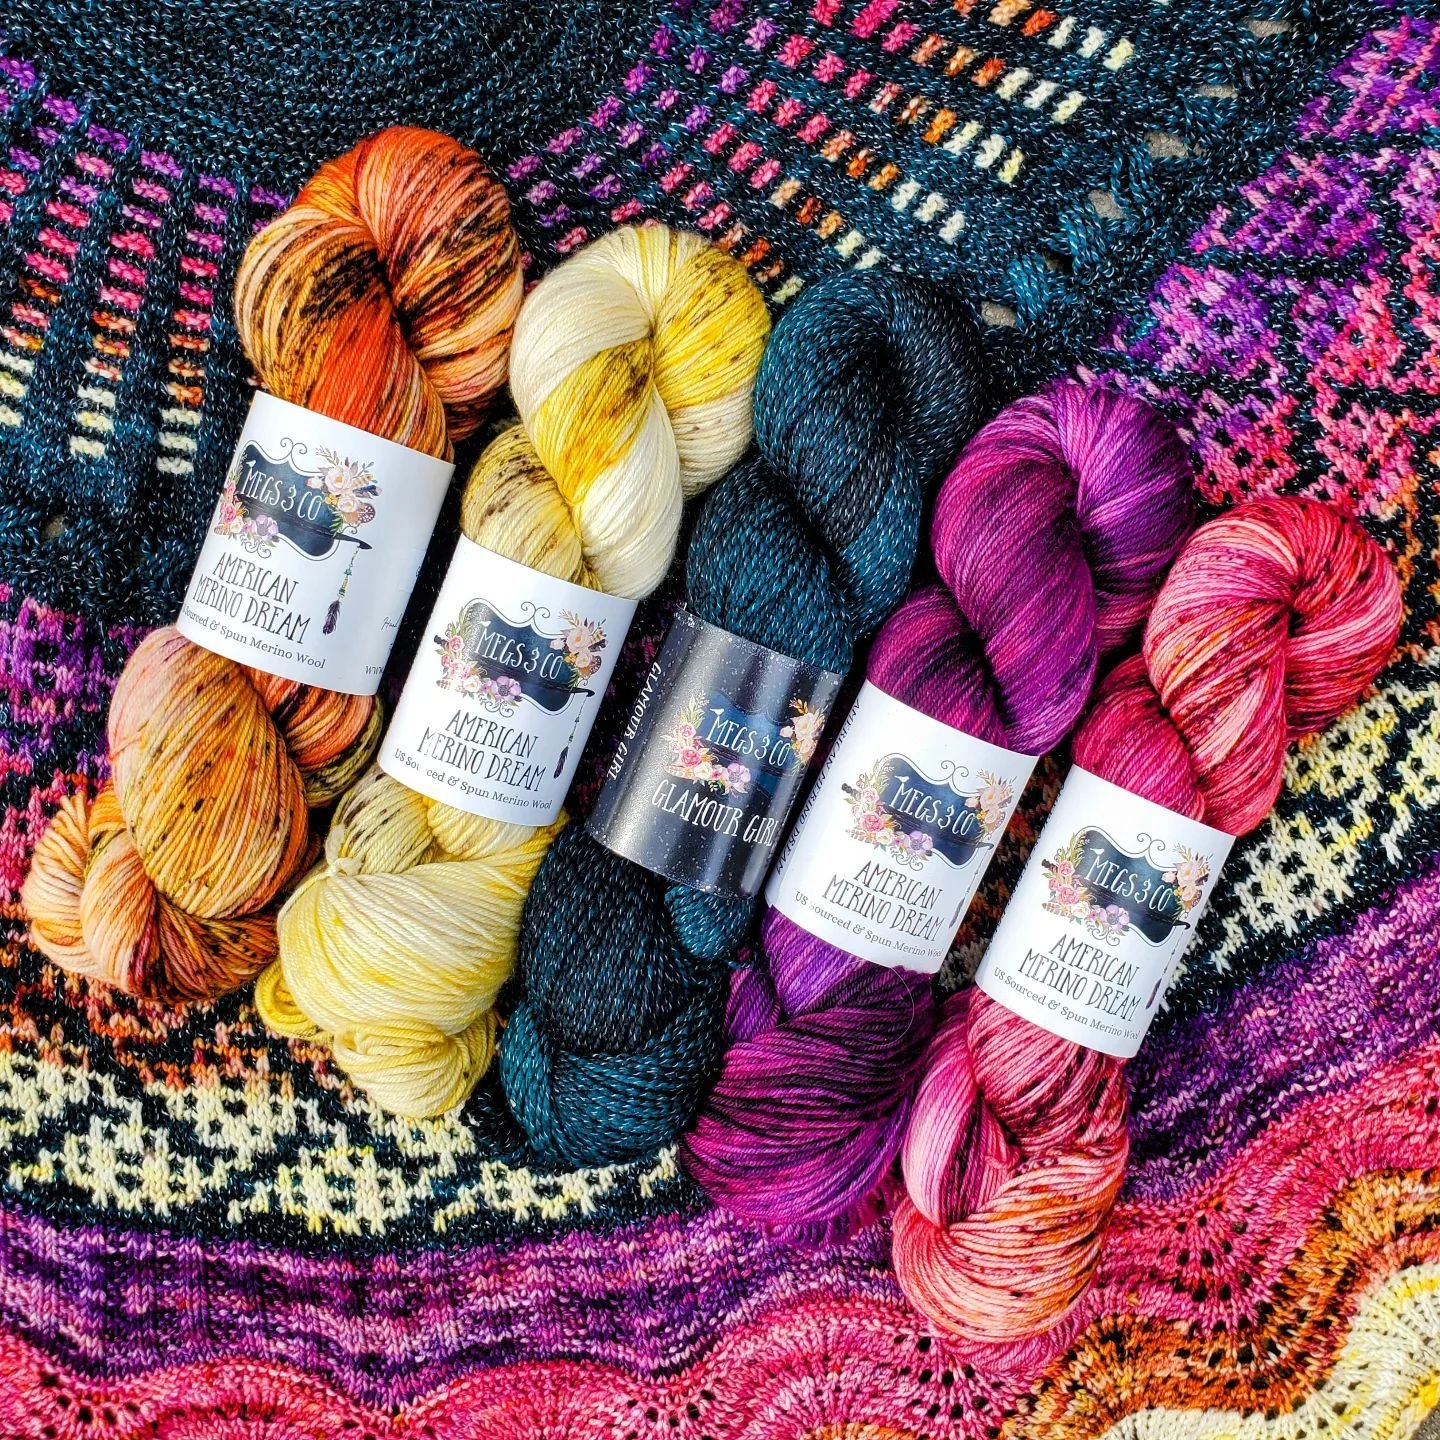 Should I list kits in the shop?

Here Comes the Sun is officially off the needles and I am so happy with how it turned out. I knit mine using 4 colors of American Merino Dream, my ultra-fine US sourced fingering weight yarn, paired with Glamour Girl 